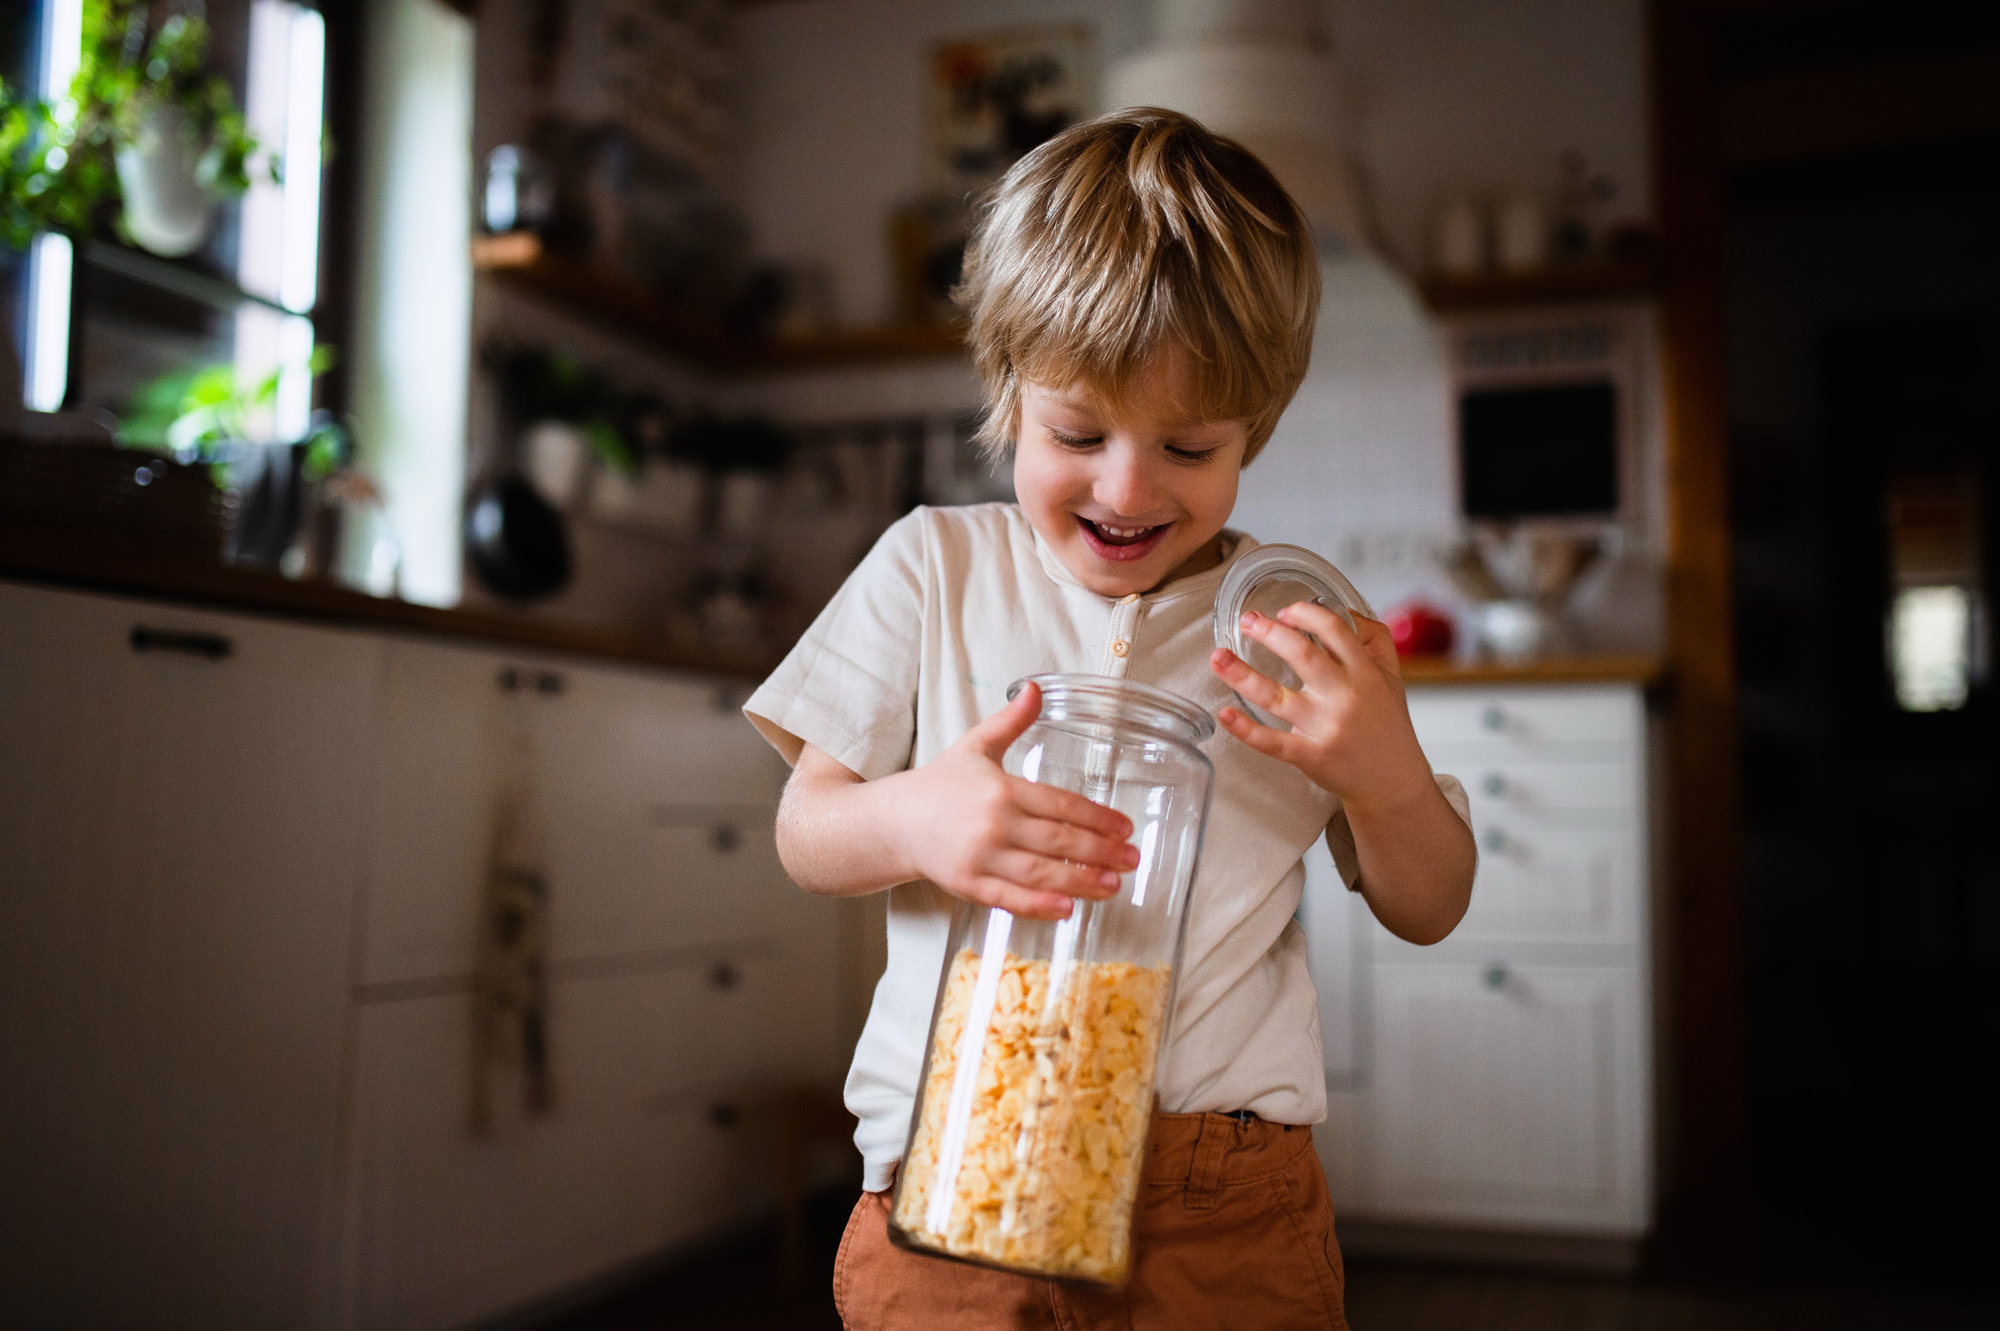 Portrait of cute small boy holding container with cornflakes indoors at home.